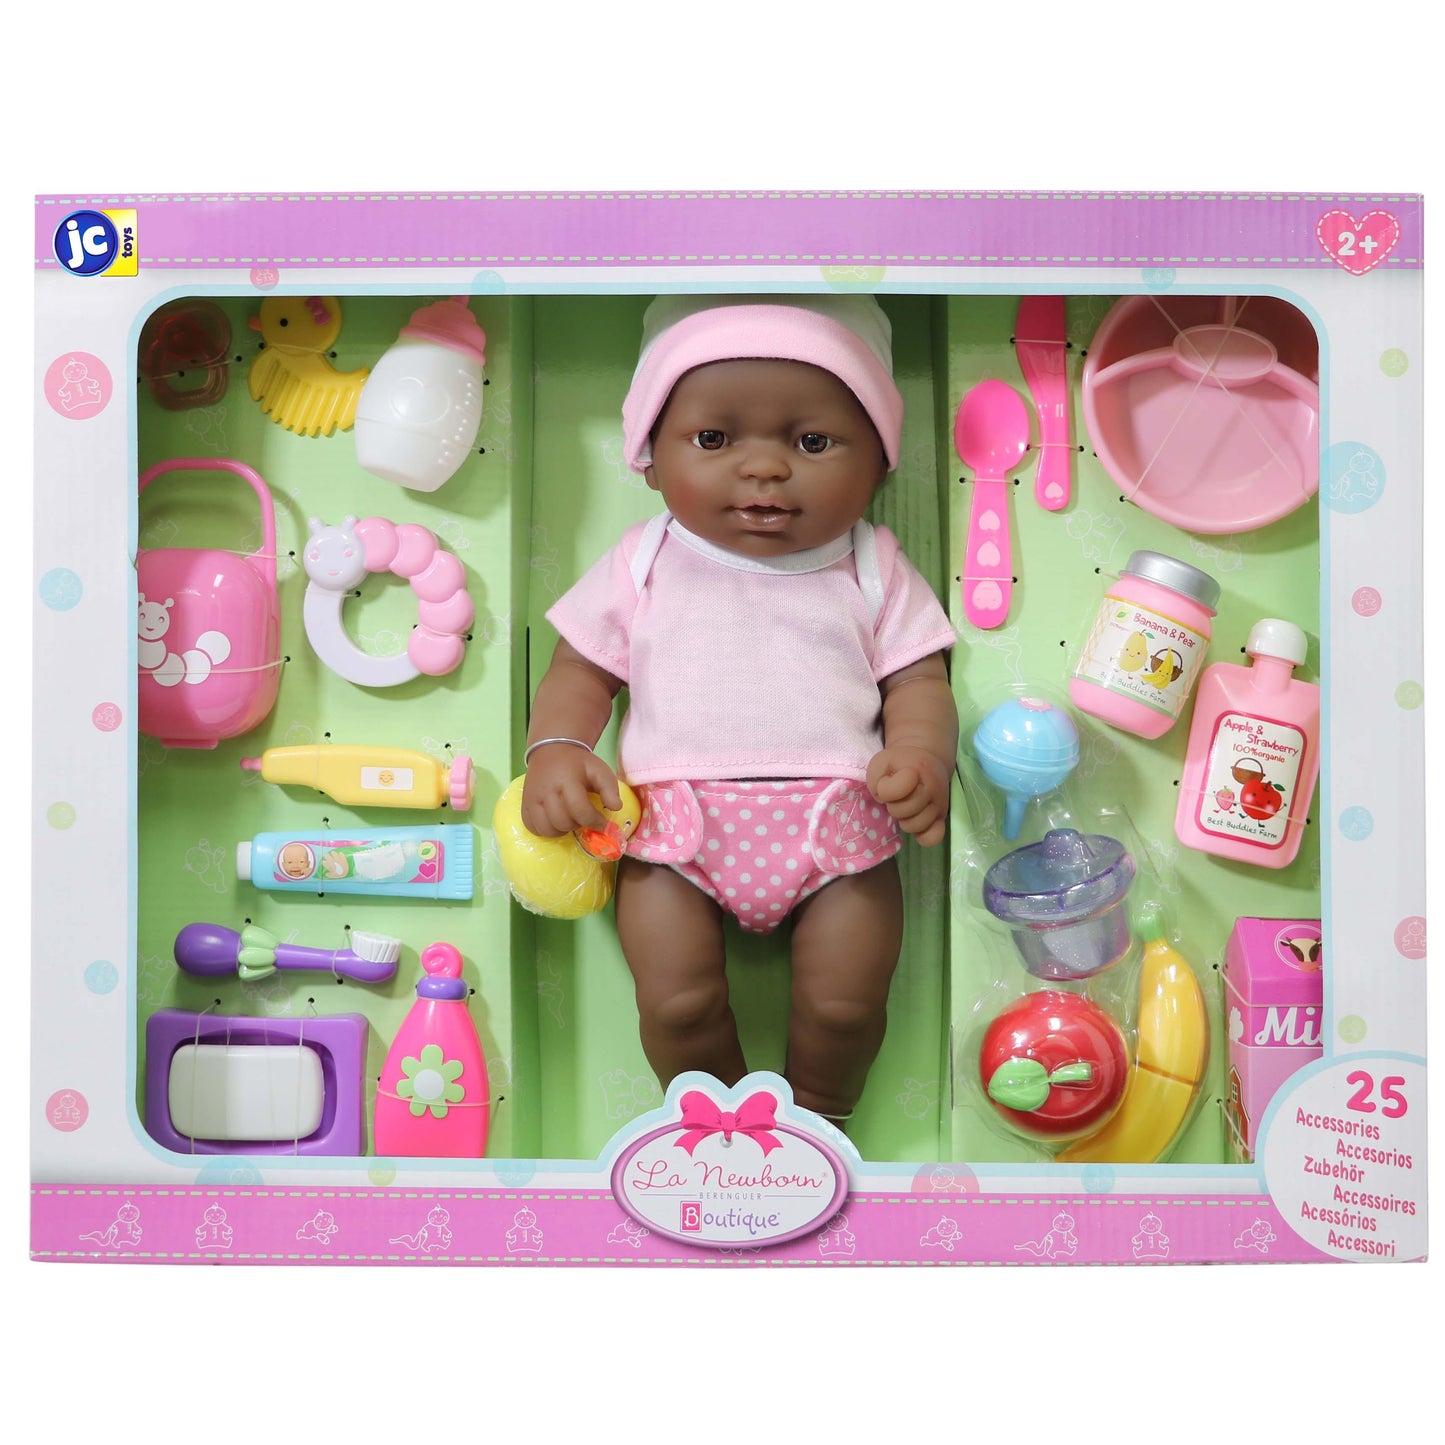 JC Toys, La Newborn Deluxe 12 inches African American Baby Doll All Vinyl Nursery 25 Piece Gift Set - JC Toys Group Inc.